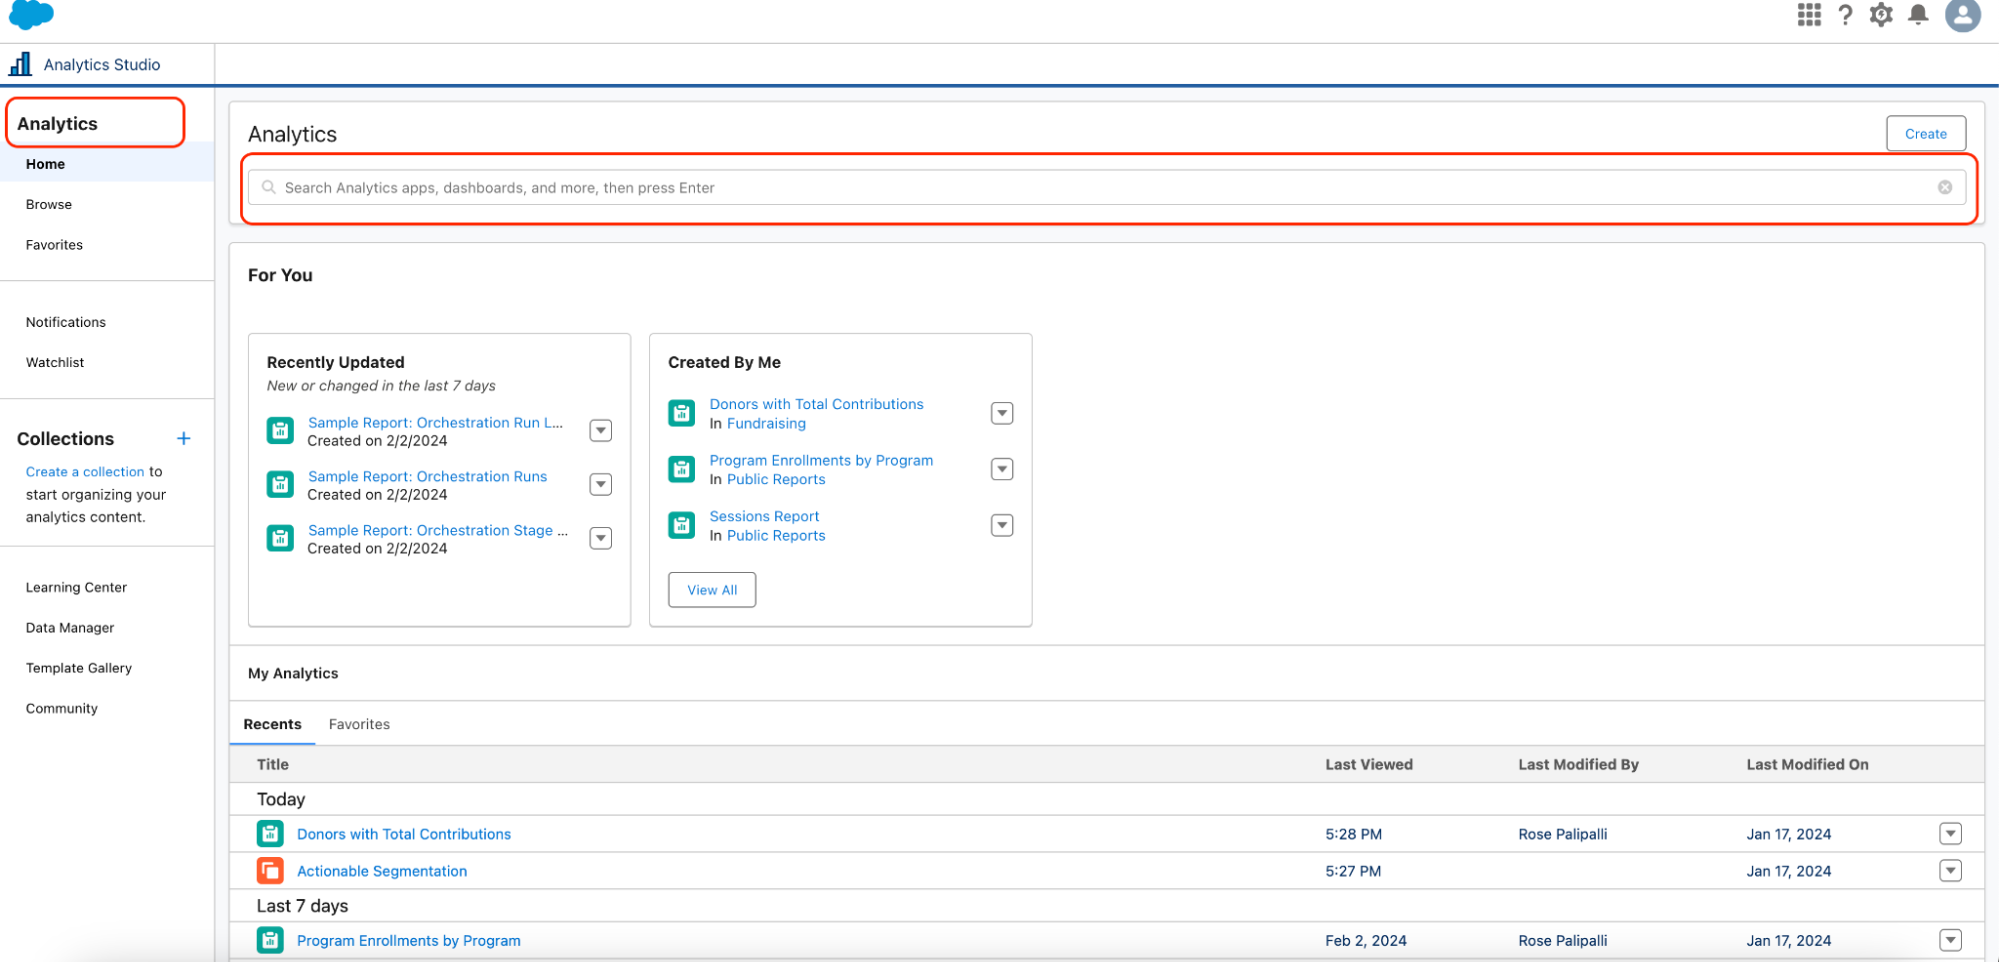 From the Analytics home page, you can search for any reports or dashboards.